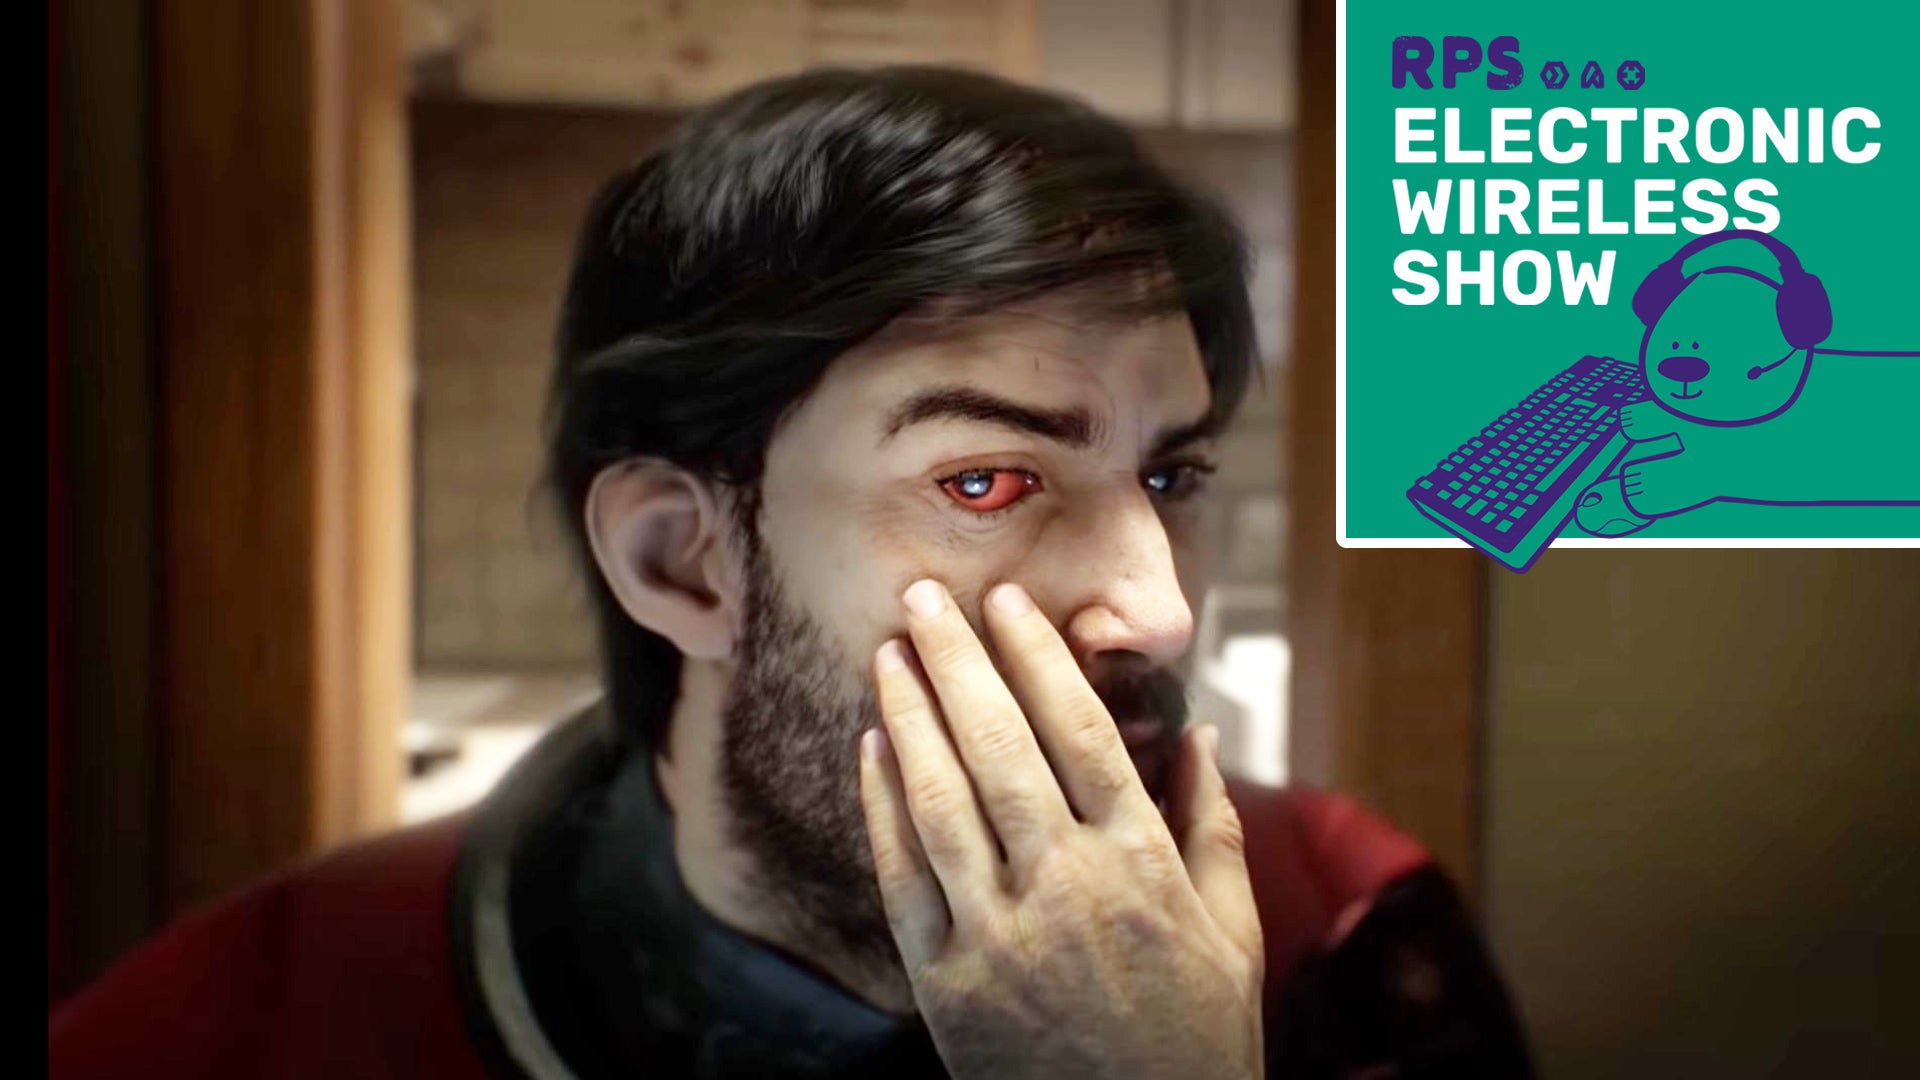 Morgan Yu from Prey inspecting his reddened right eye in the mirror, with the Electronic Wireless Show logo in the top right corner of the image